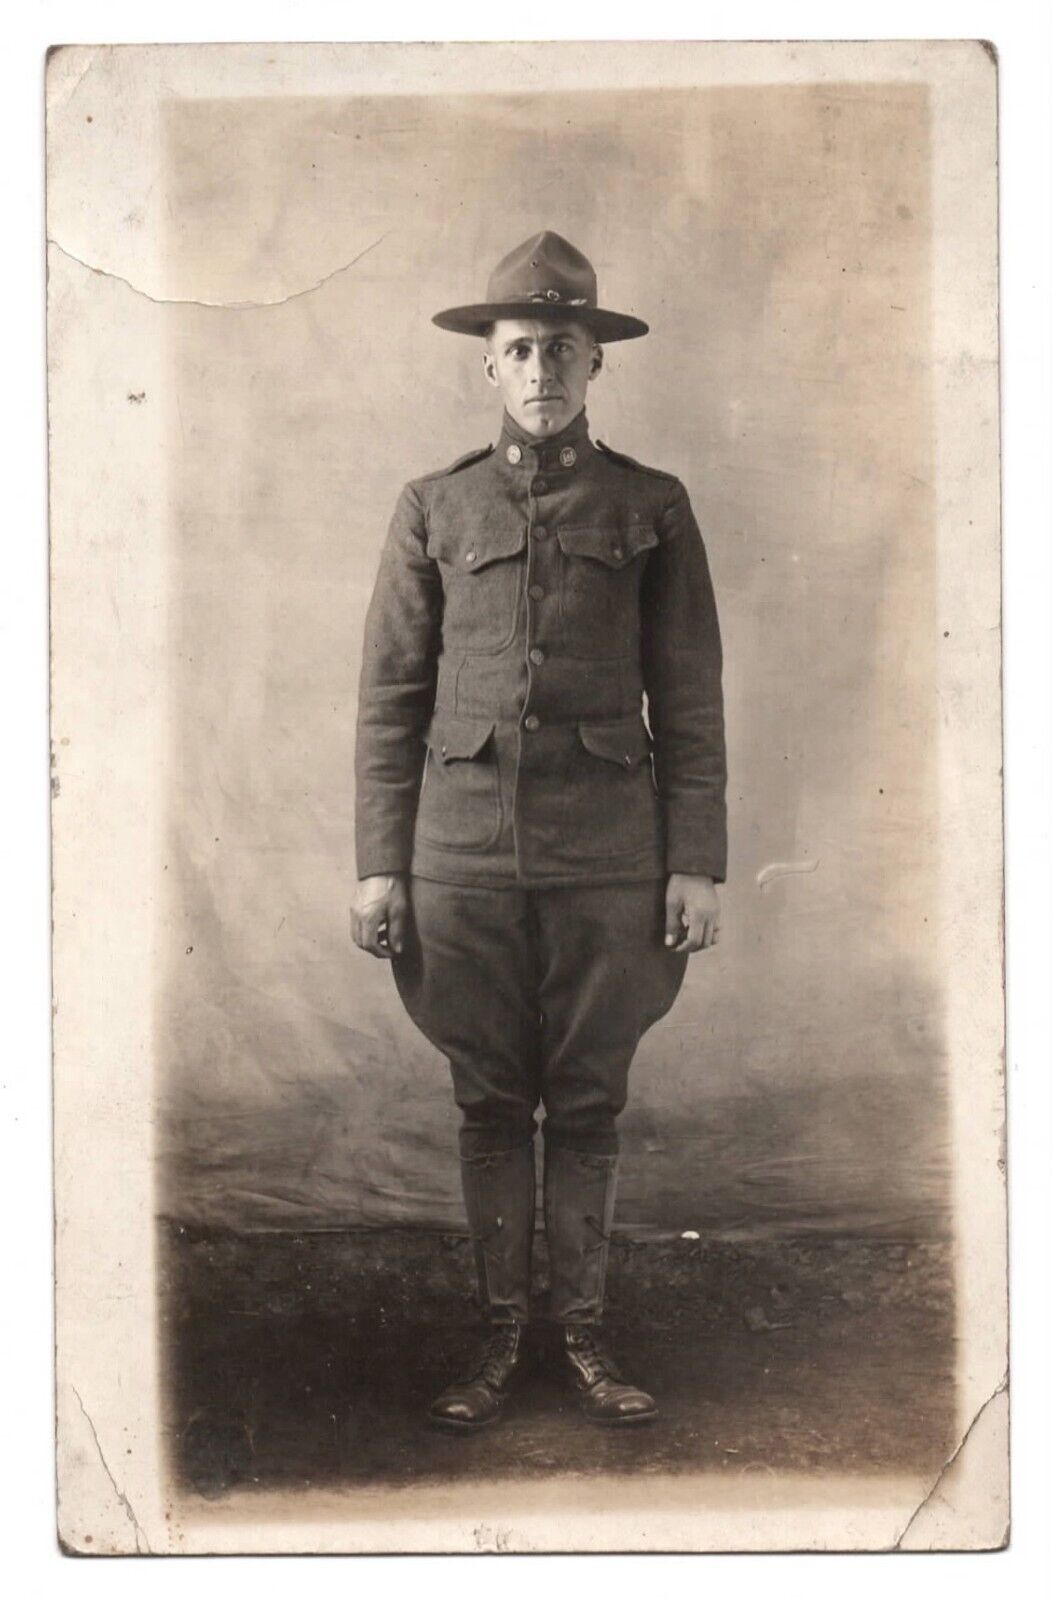 WW1 American Soldier RPPC 1917 in Uniform Vintage Military Real Photo Postcard